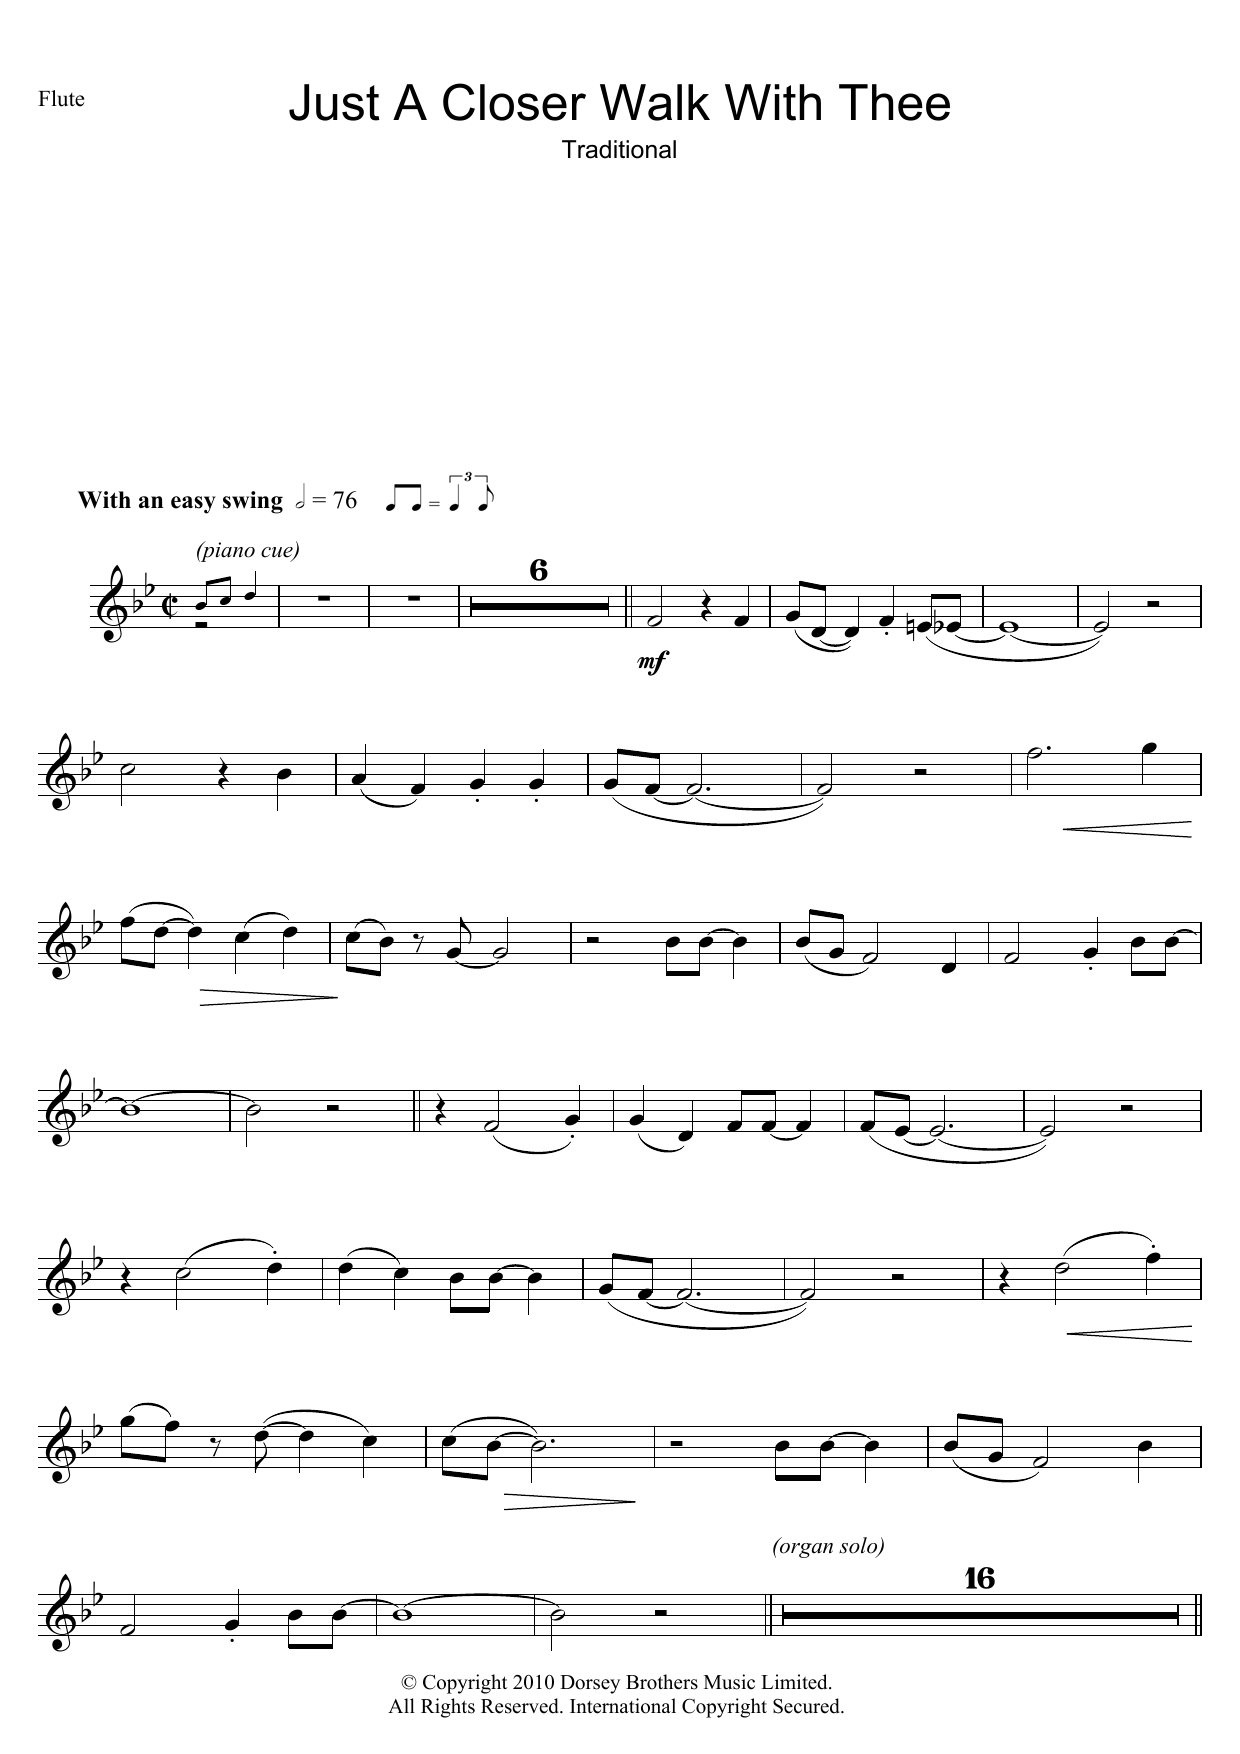 Download African-American Spiritual Just A Closer Walk With Thee Sheet Music